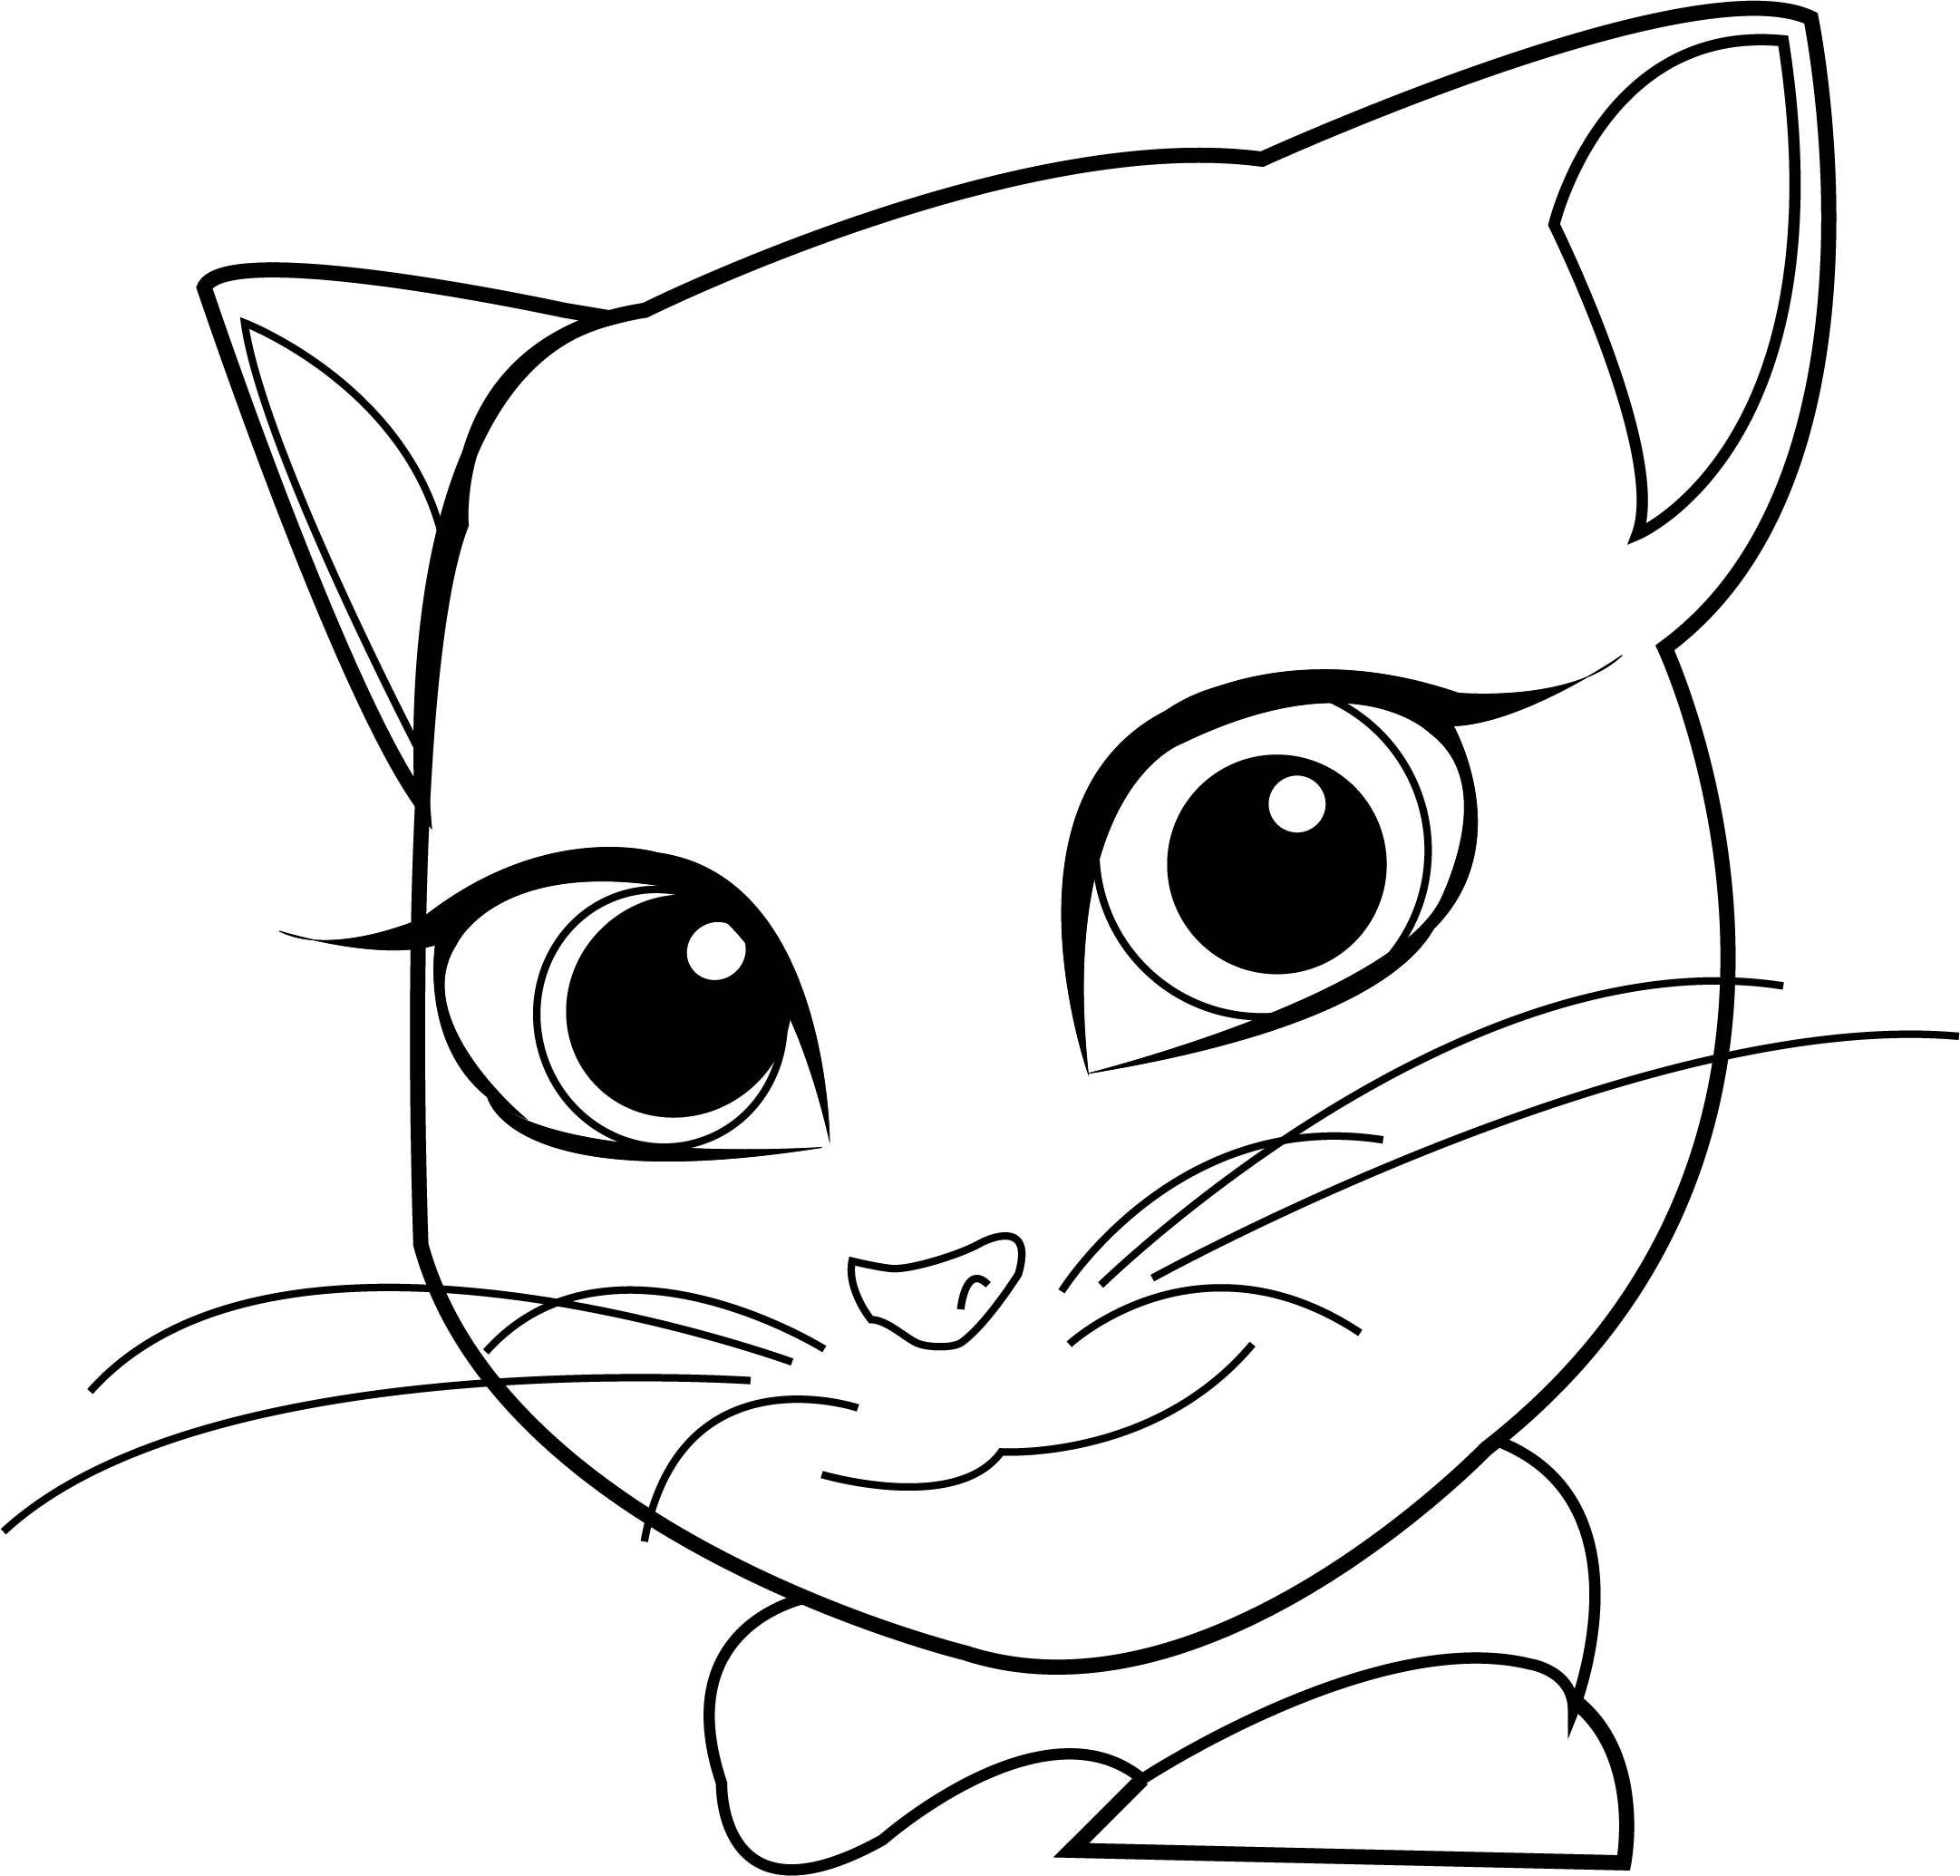 cat-face-coloring-pages-at-getcolorings-free-printable-colorings